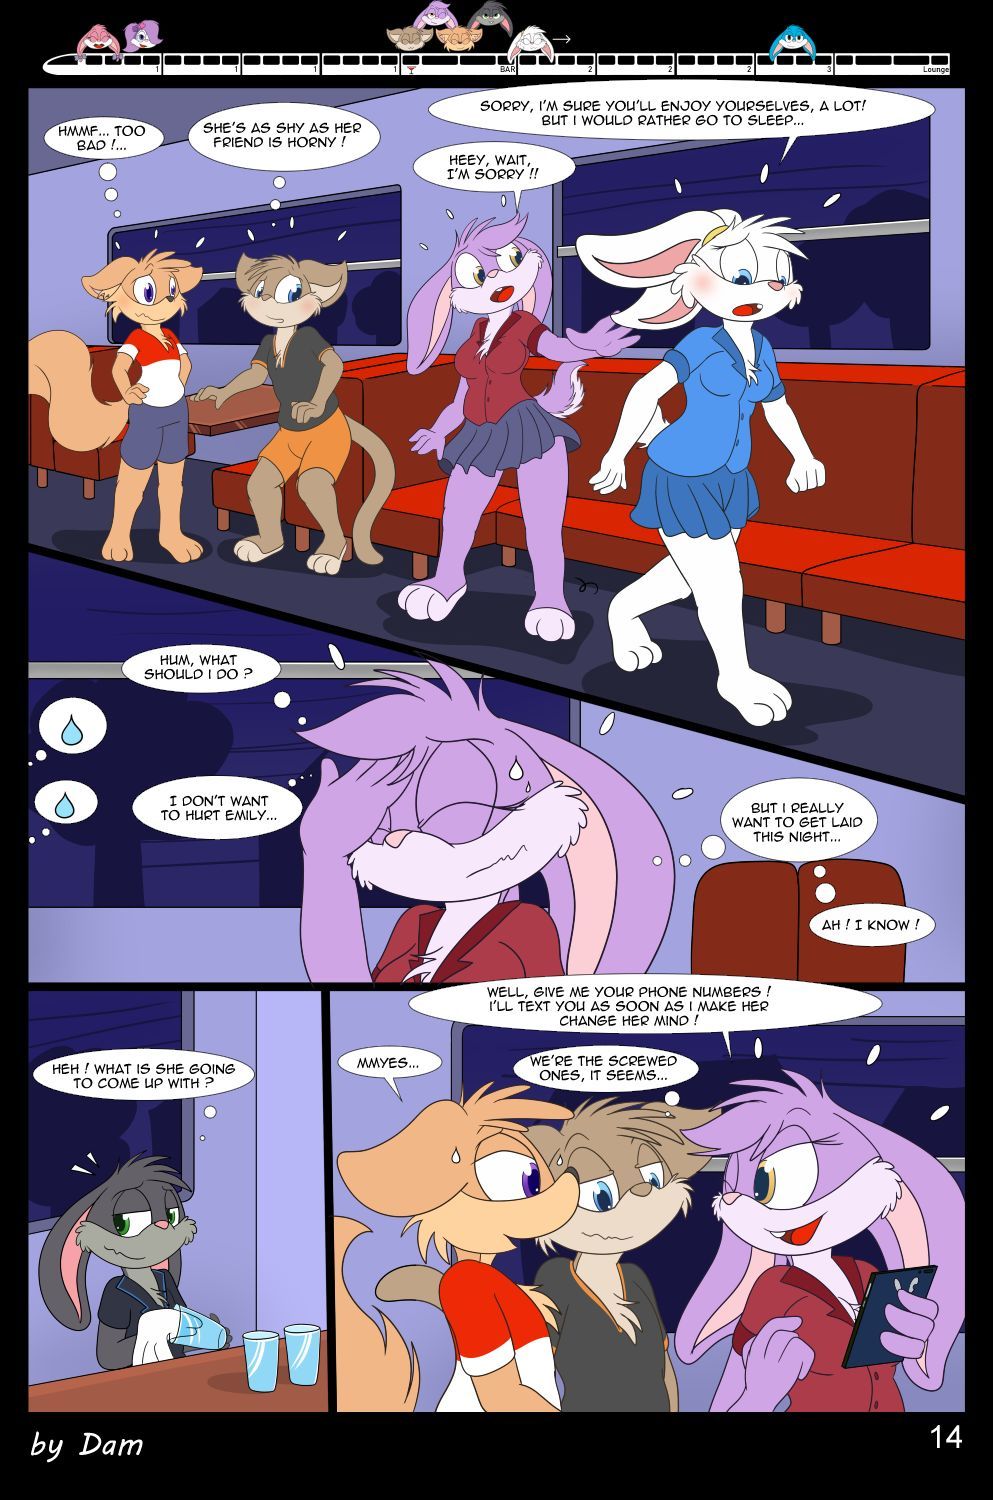 [Dam] Toons on a train [Ongoing] 14